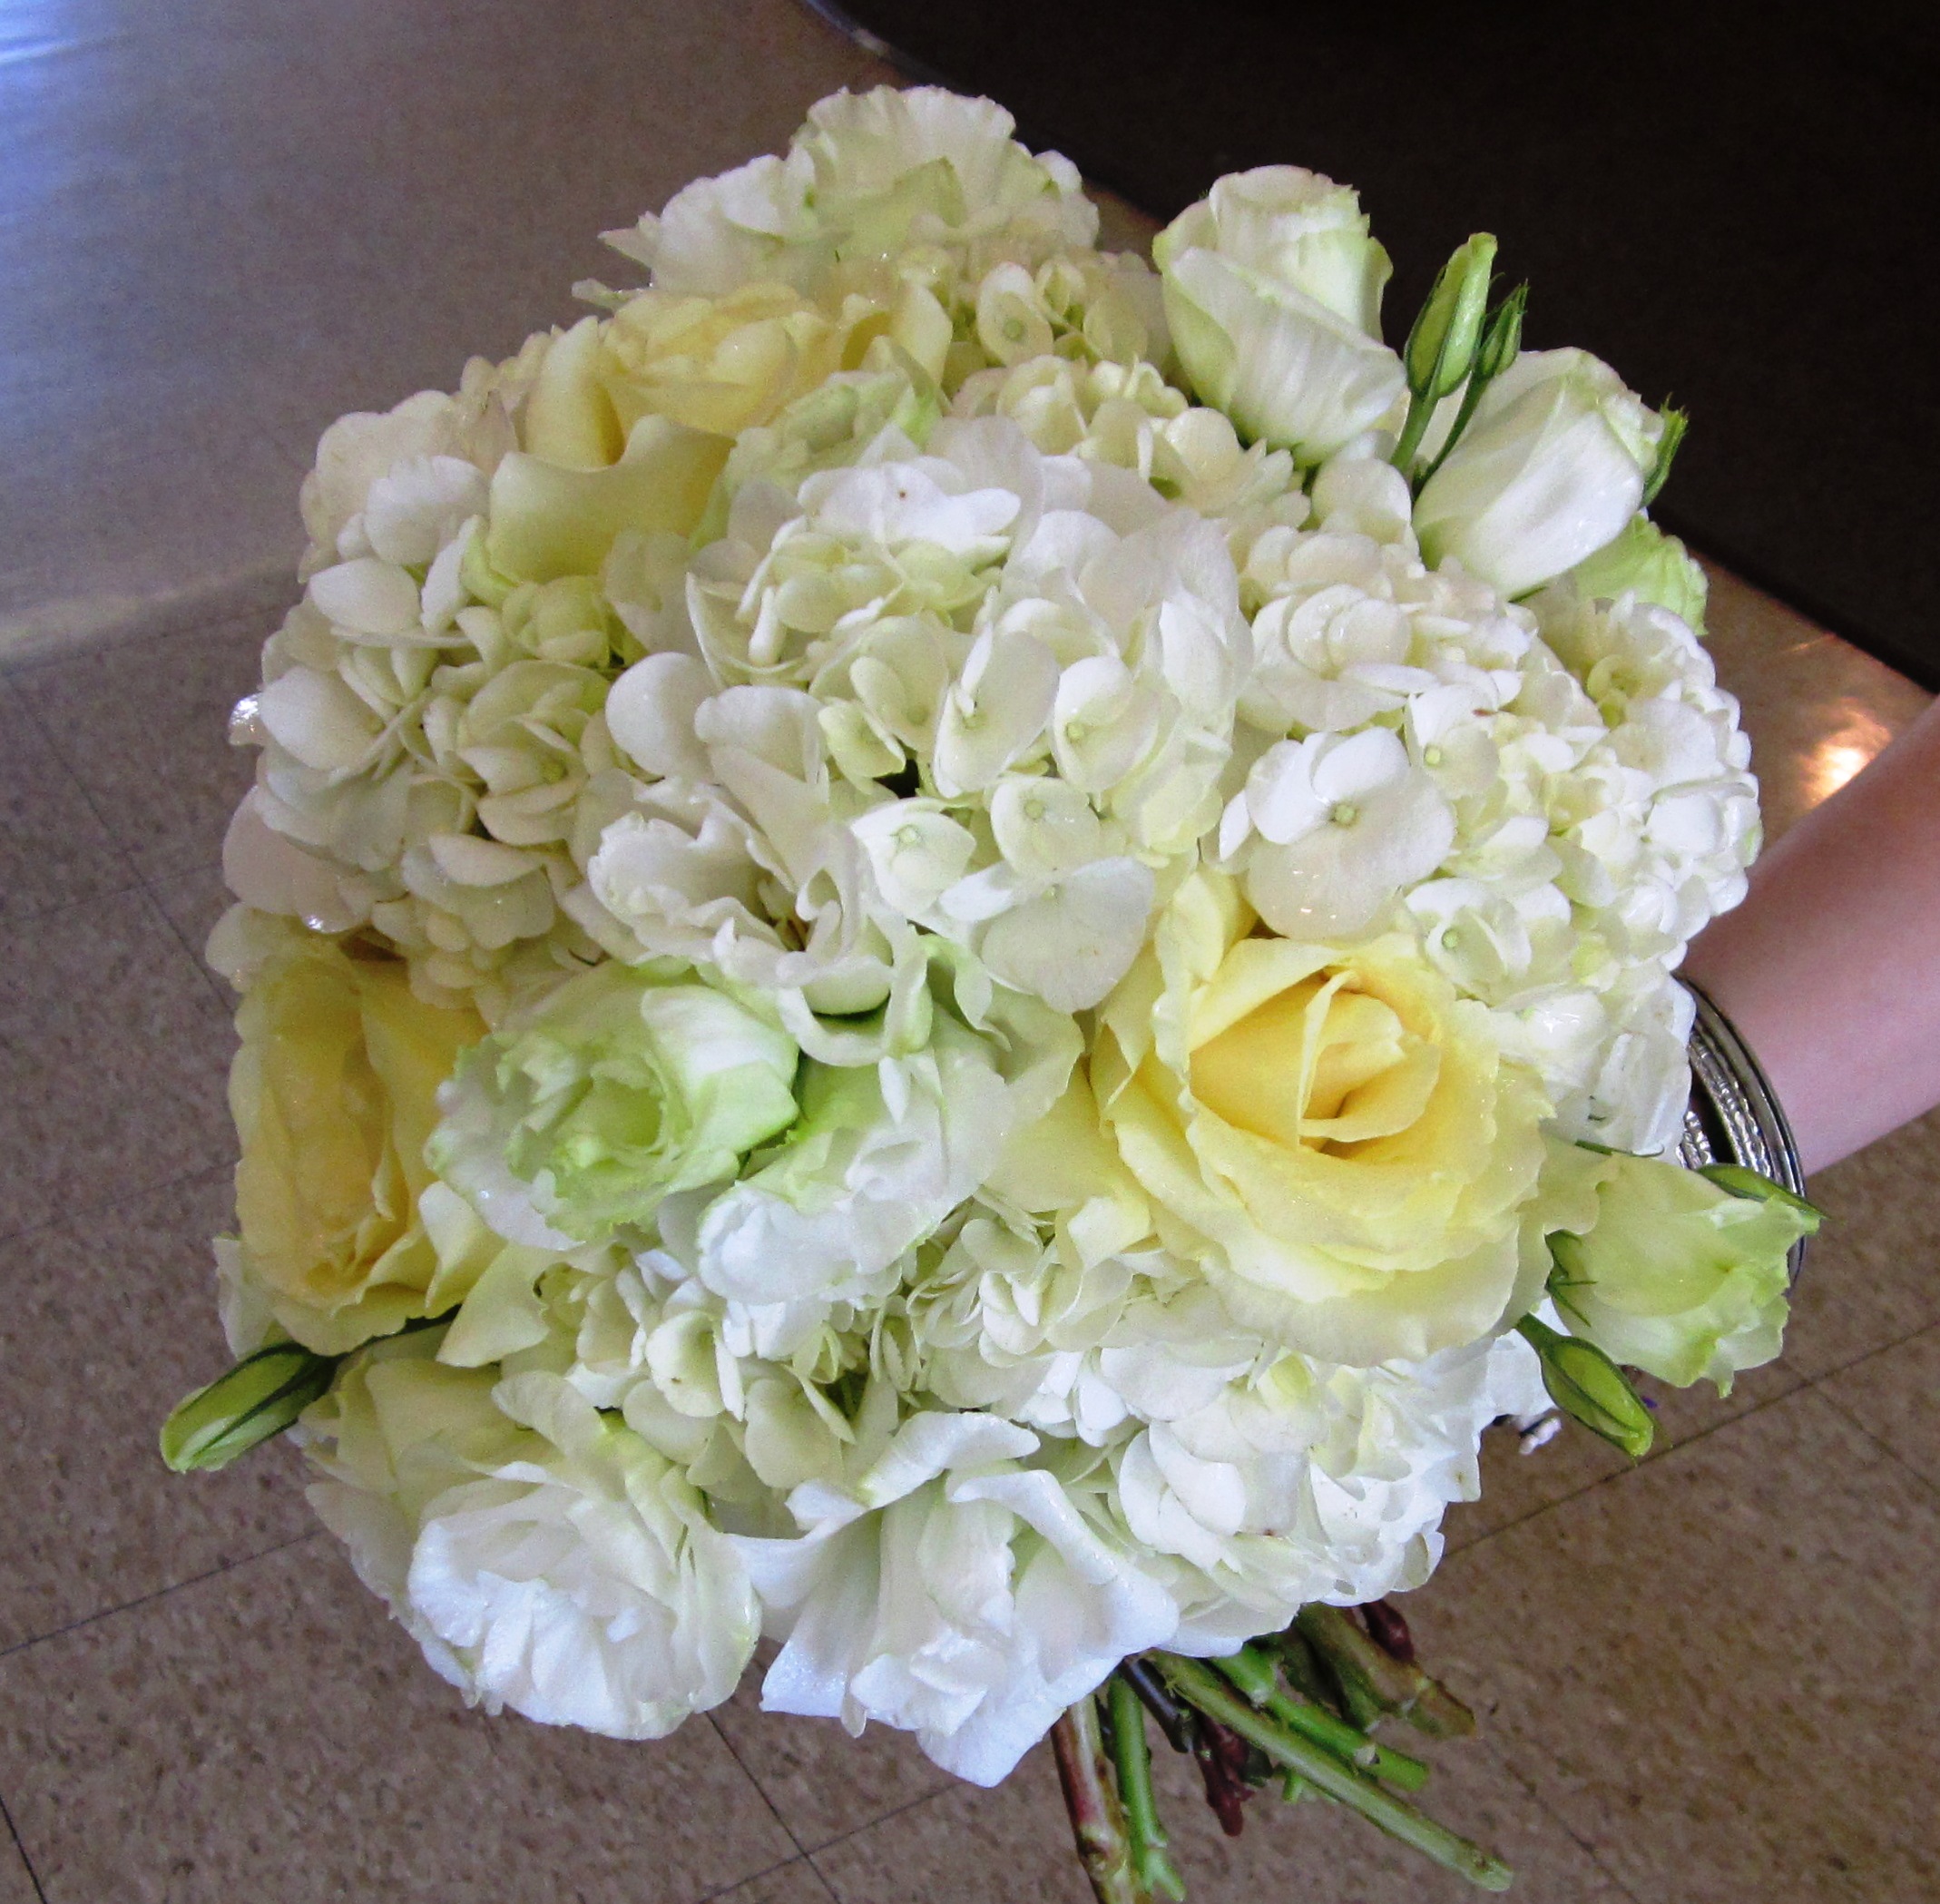 White roses, white hydrangea, Cream garden roses and lisianthus in a 